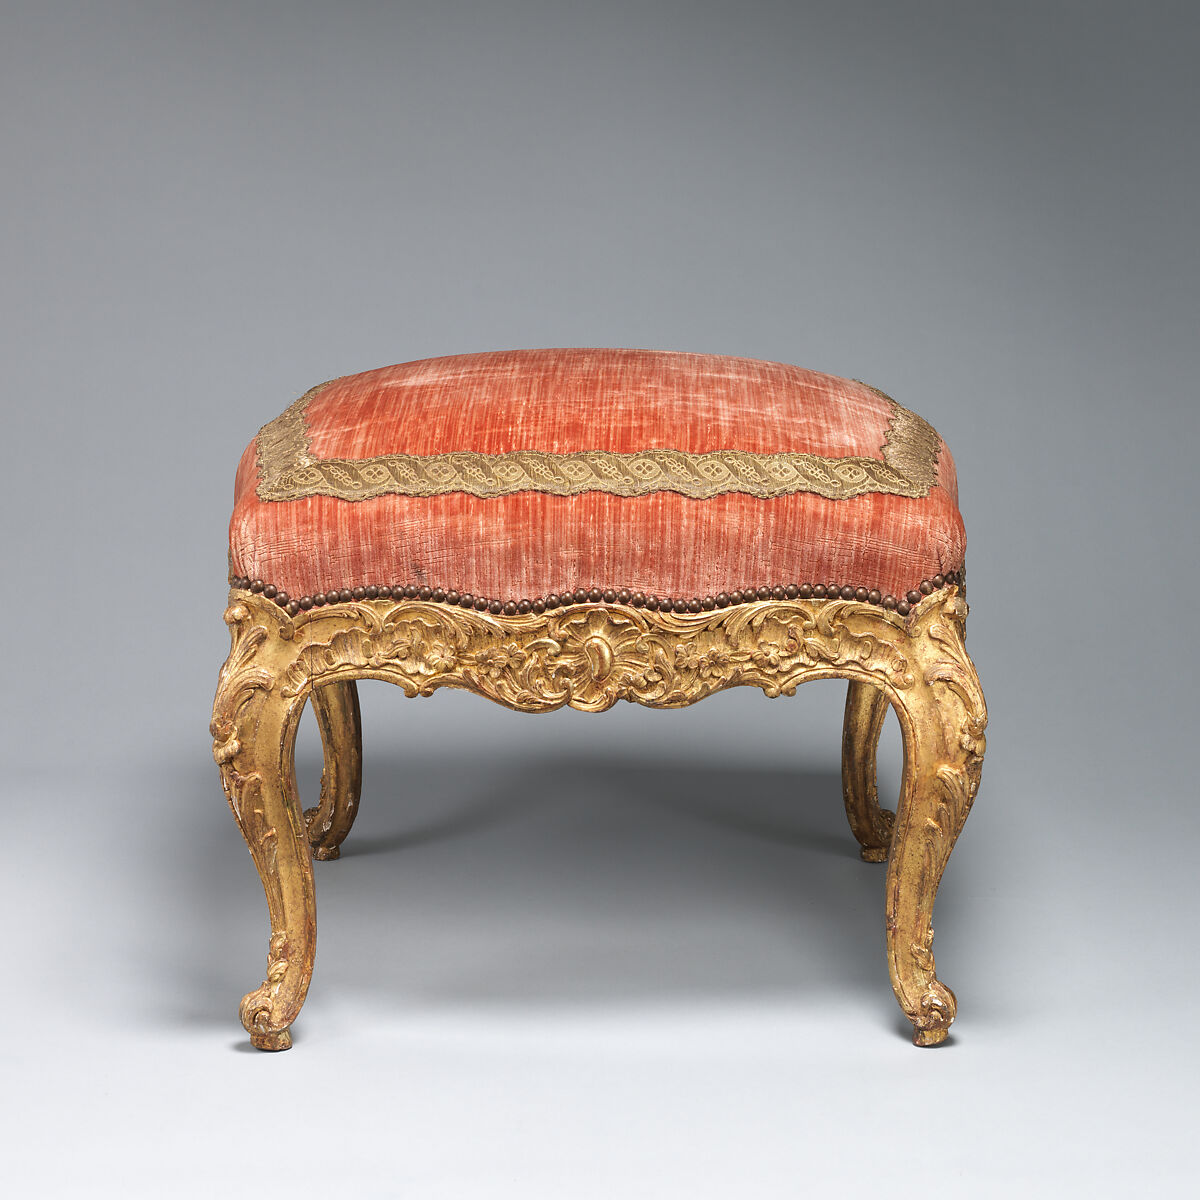 Stool (tabouret) (one of a pair), Possibly by Jean-Baptiste I Tilliard (French, 1686–1766), Beechwood frame, carved and gilded, upholstered in modern velvet., French, Paris 